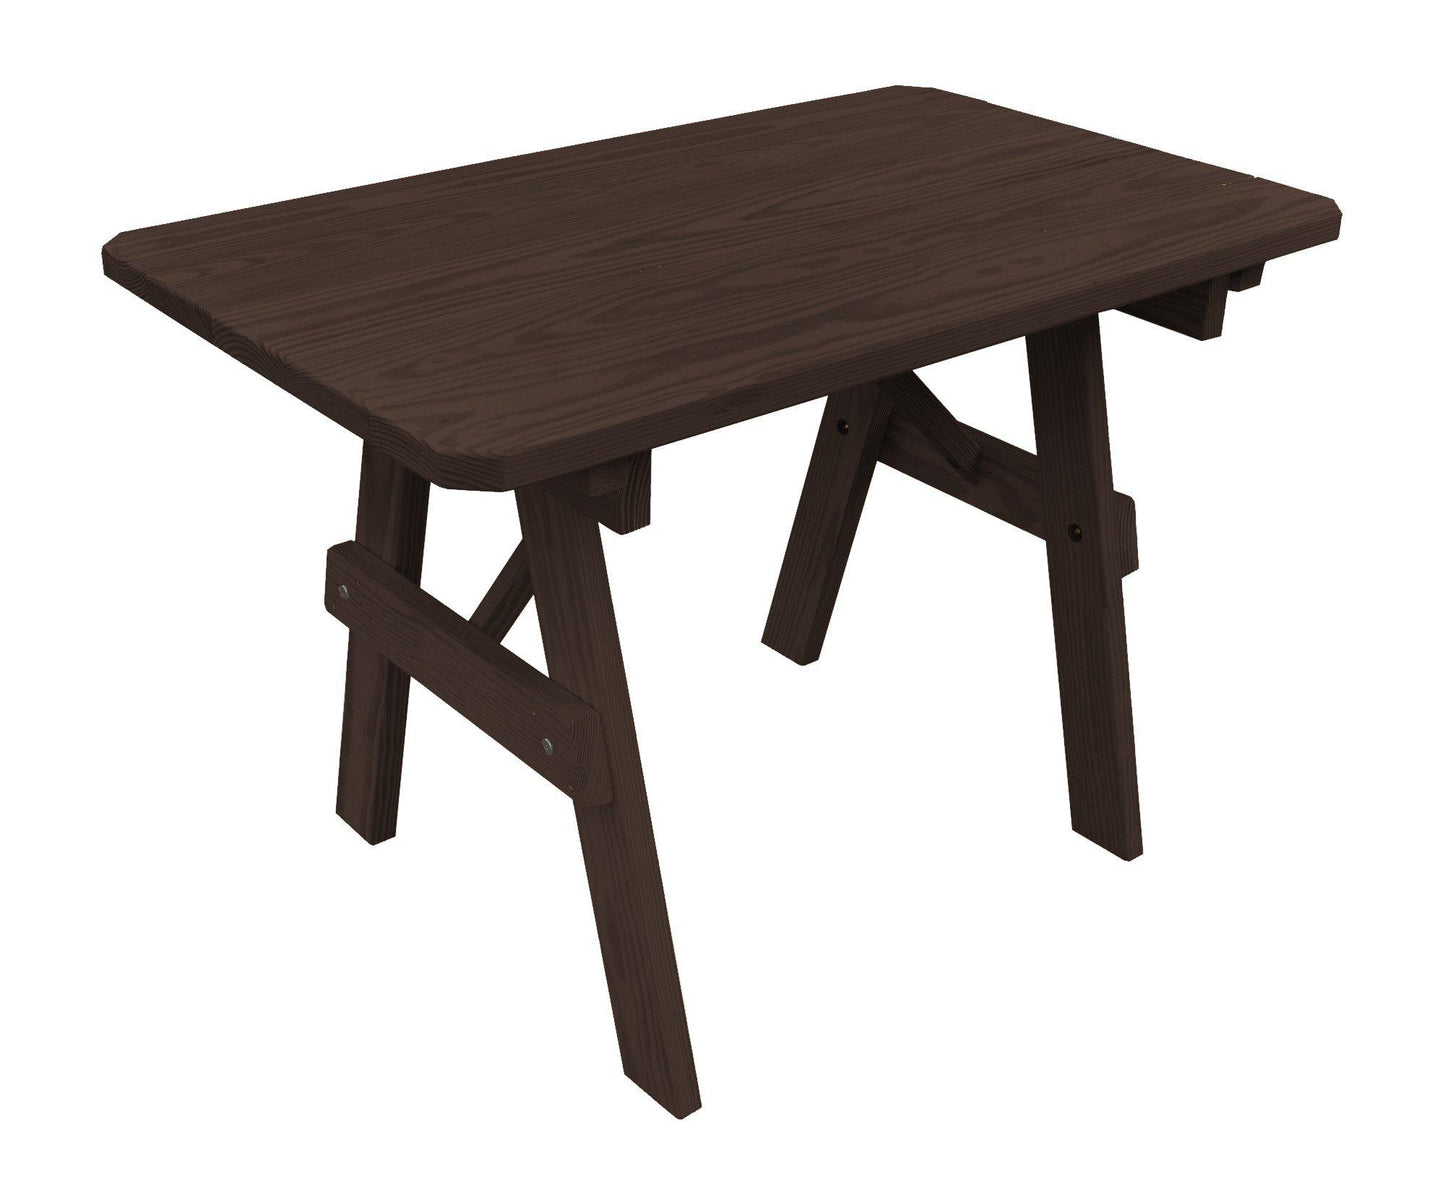 A&L Furniture Co. Yellow Pine 4' Traditional Table Only - Specify for Umbrella Hole - LEAD TIME TO SHIP 10 BUSINESS DAYS